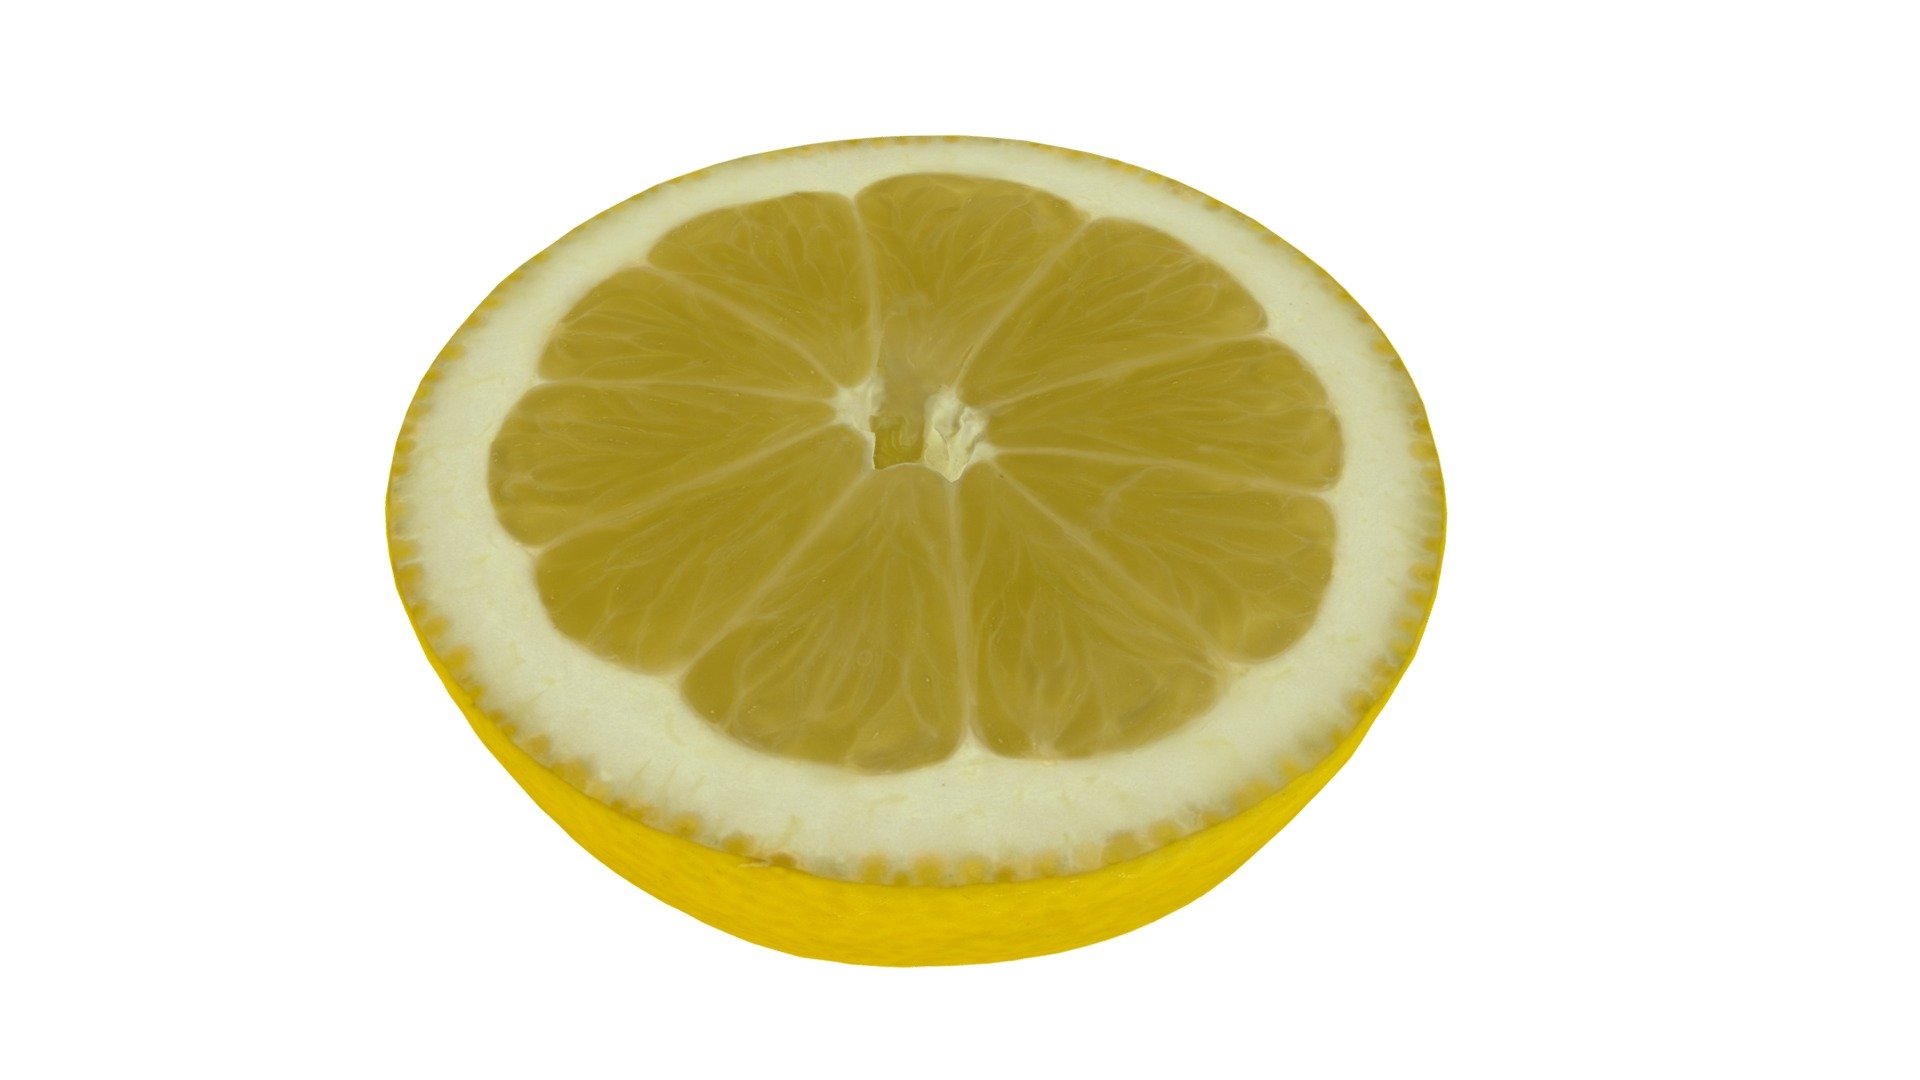 Highly detailed, photorealistic, 3d scanned model of a lemon half. 8k textures maps, optimized topology and uv unwrapped.

Model shown here is lowpoly with diffuse map only and 4k texture size.

This model is available at www.thecreativecrops.com 3d model